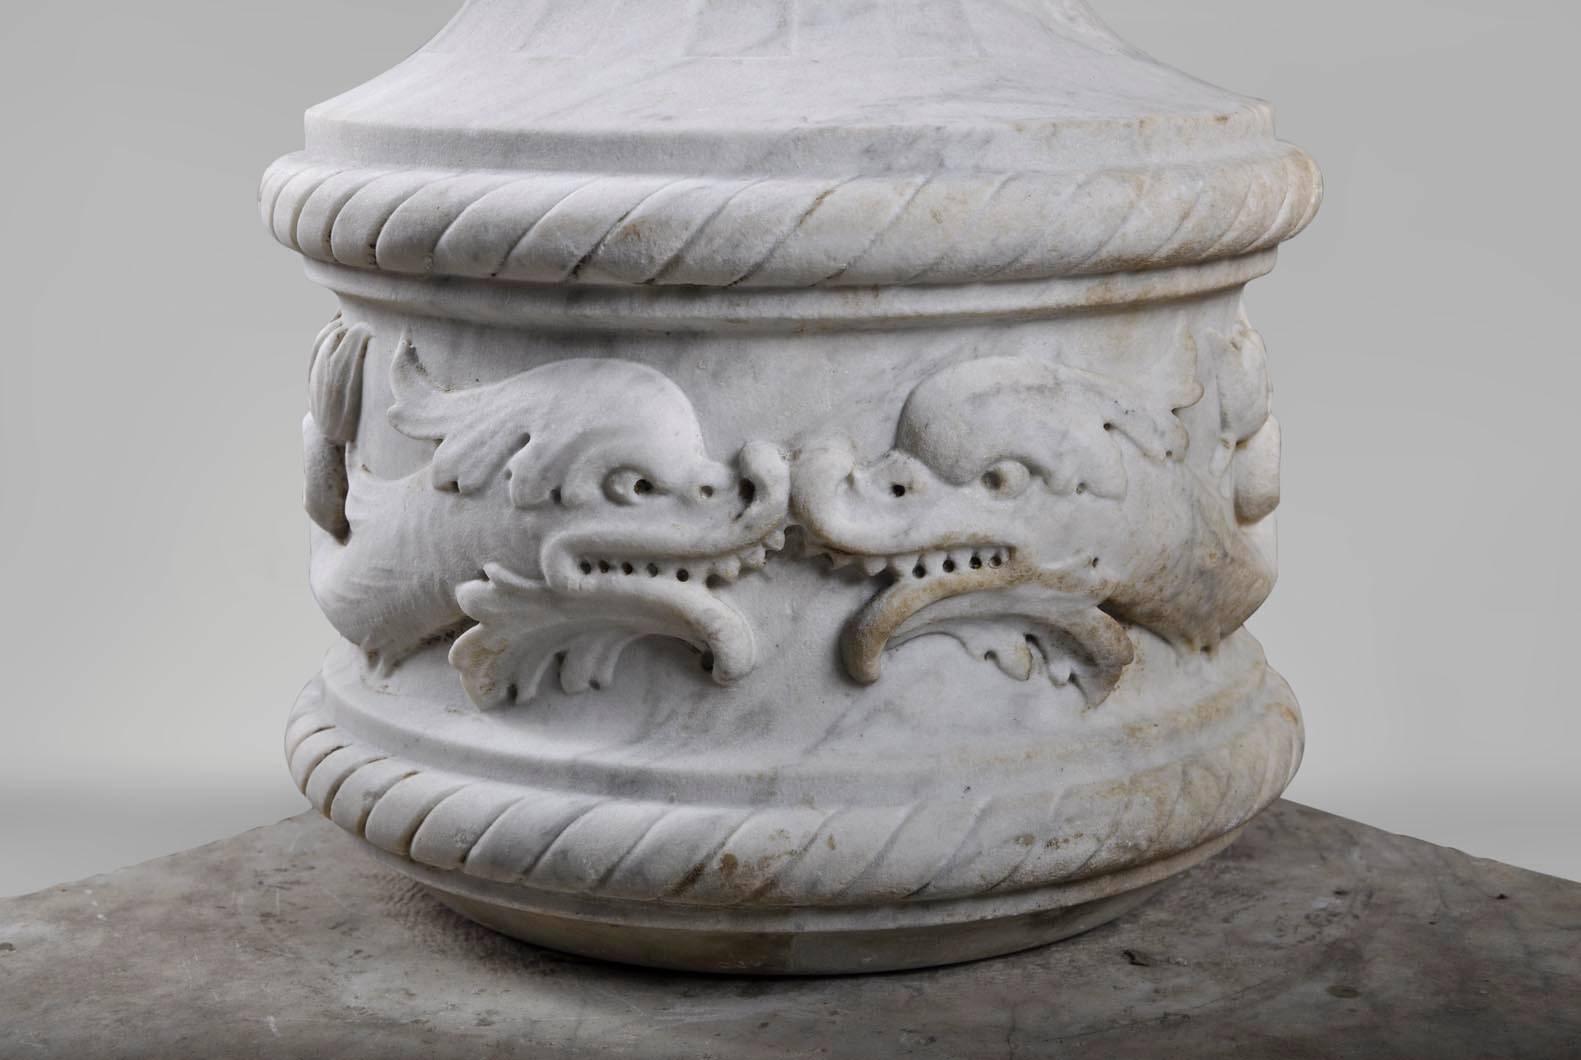 Renaissance Revival Fountain with Dolphins Decor Sculpted Out White Carrara Marble, 19th Century